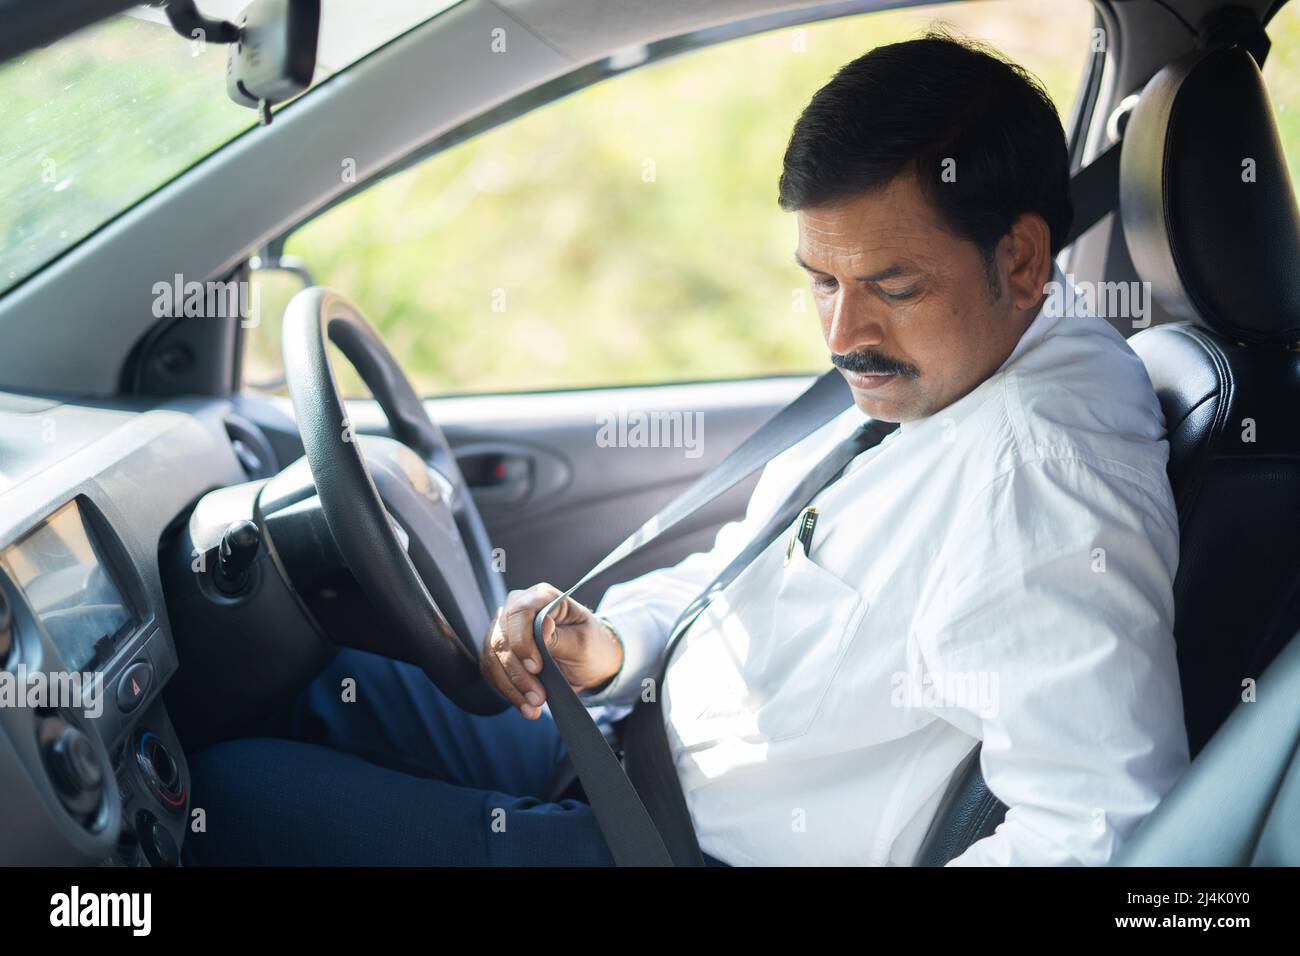 Businessman wearing seat belt before driving car - concept of safety precautions, protection and responsibility. Stock Photo